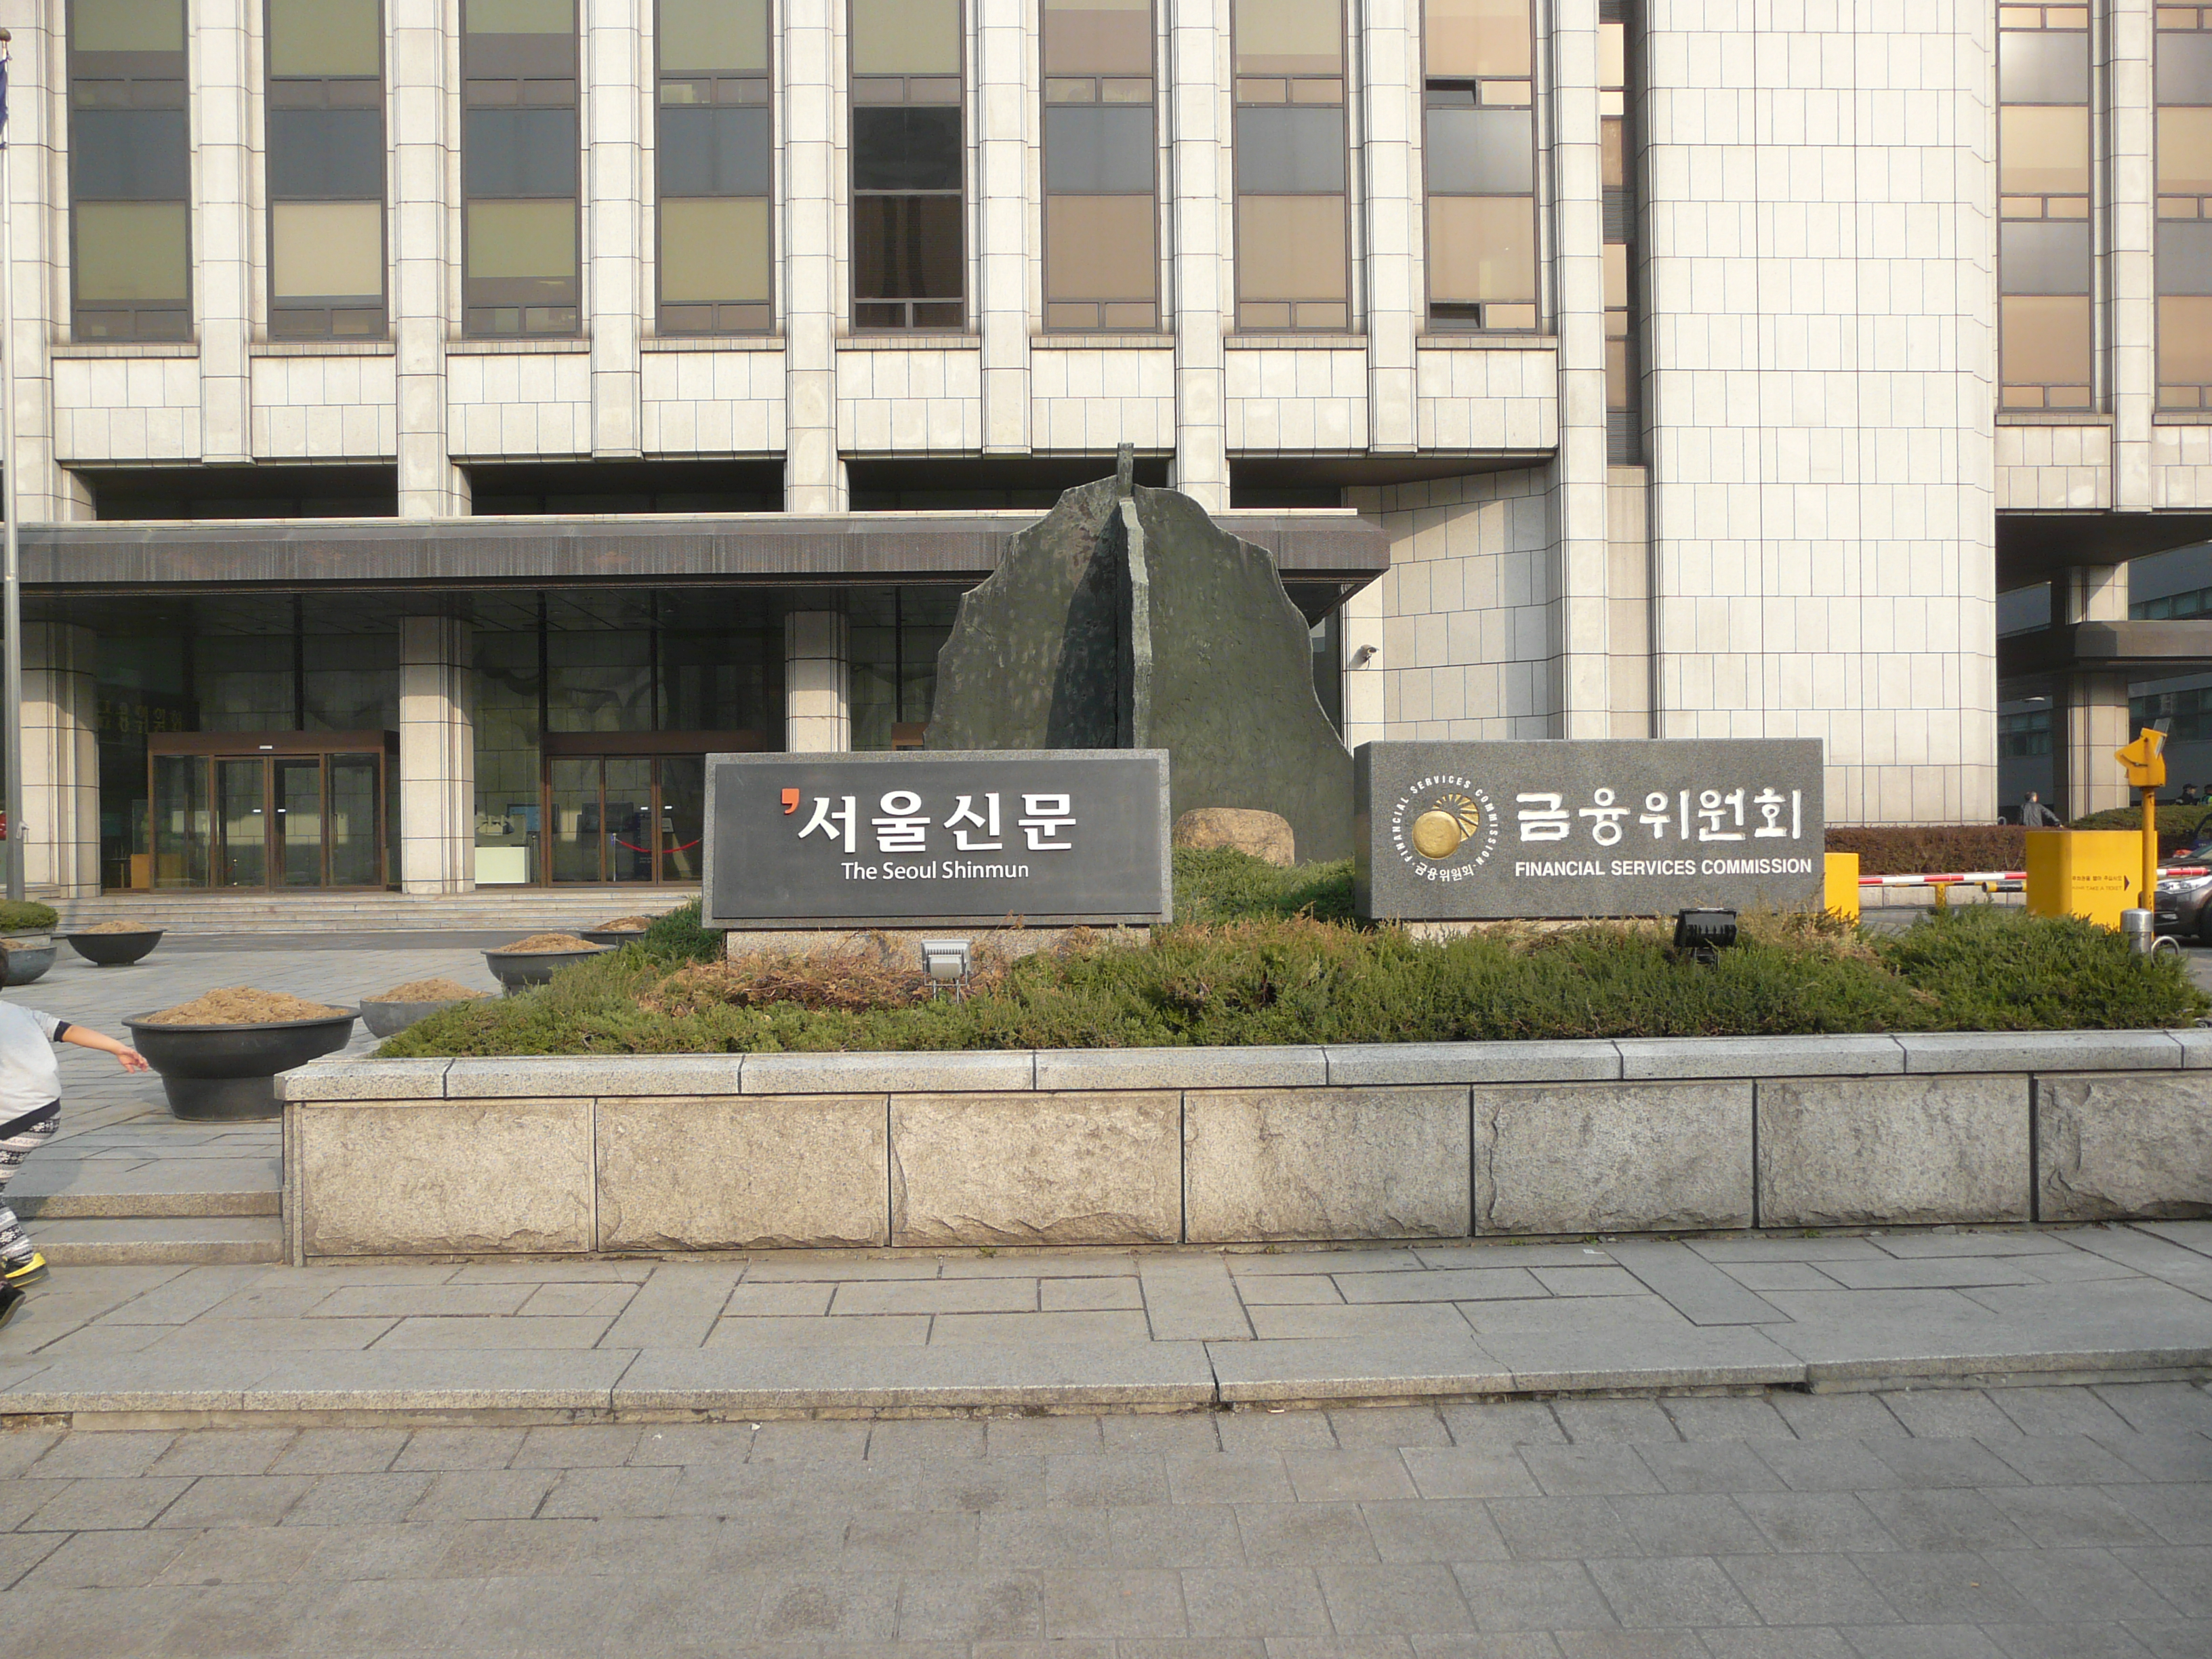 Office of the Financial Services Commission in Seoul.